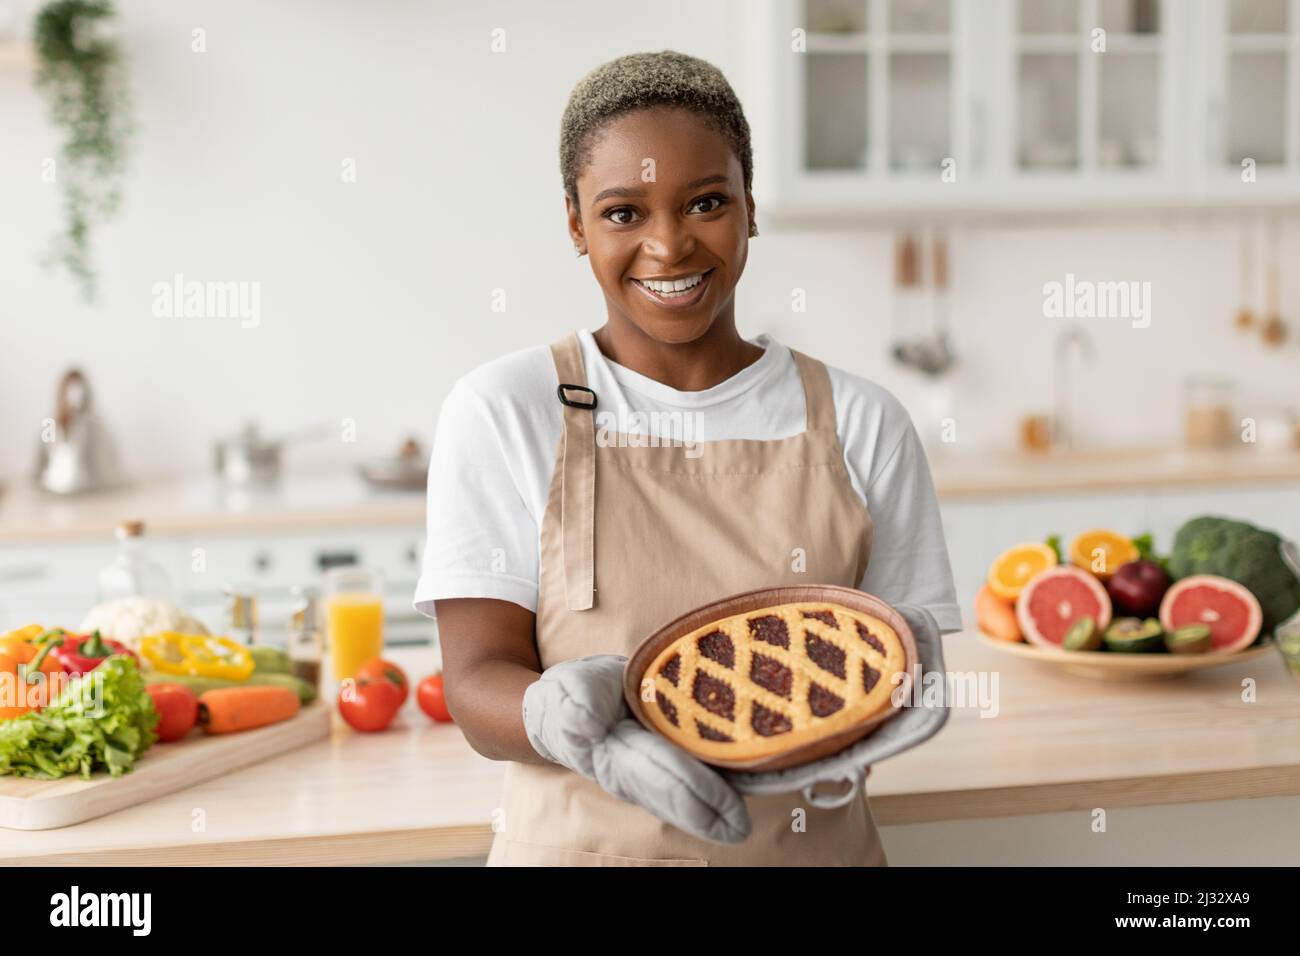 Smiling pretty millennial african american woman in apron showing tasty pie in minimalist kitchen interior Stock Photo